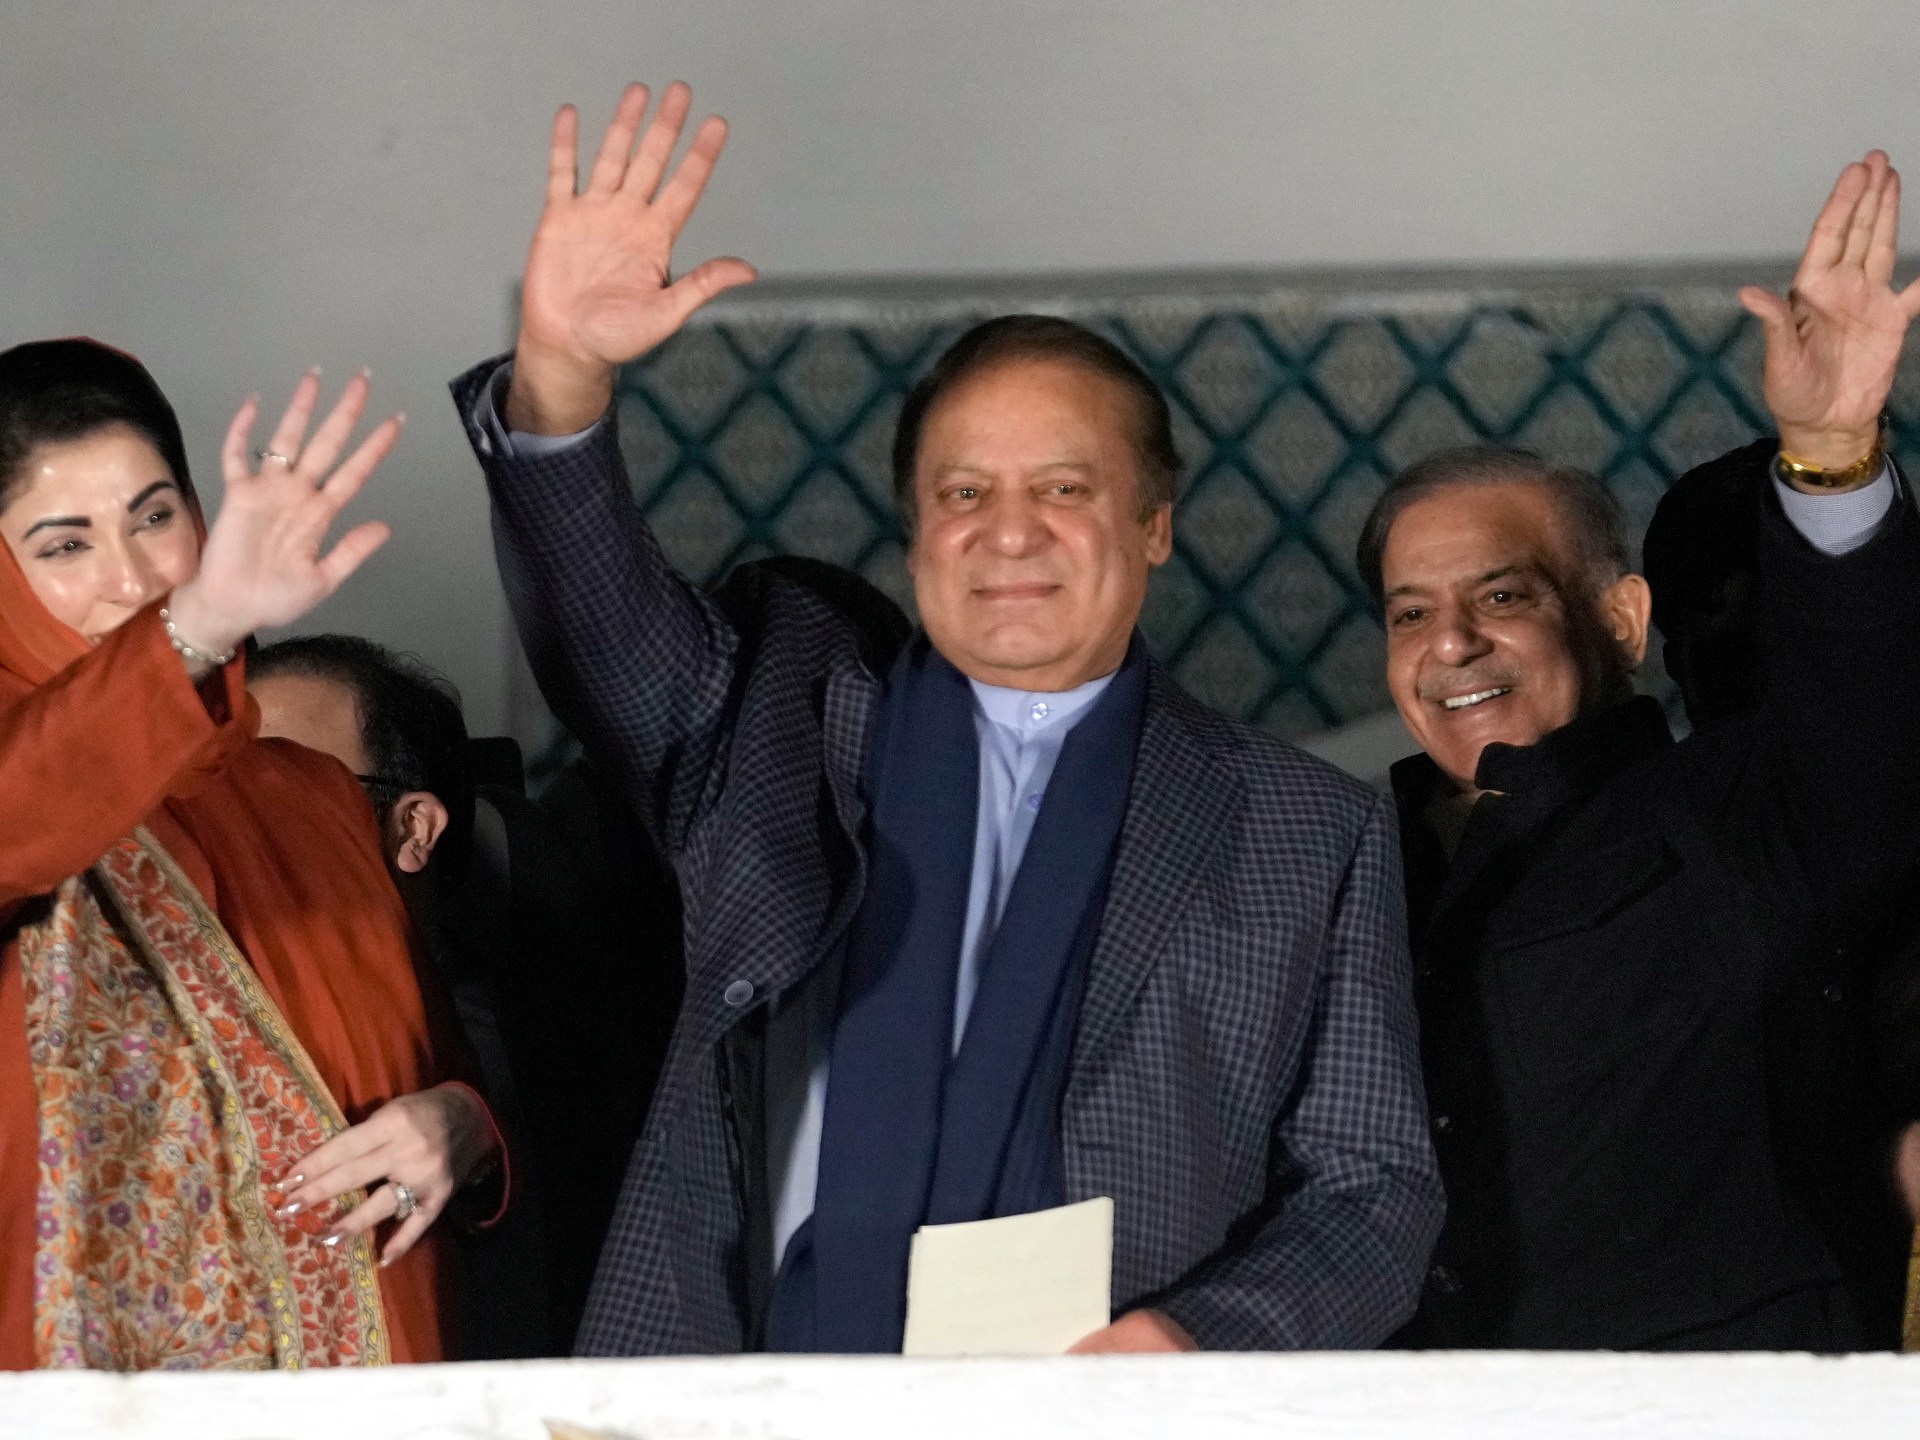 Nawaz Sharif tells crowds in Lahore he will seek to form a coalition | Elections